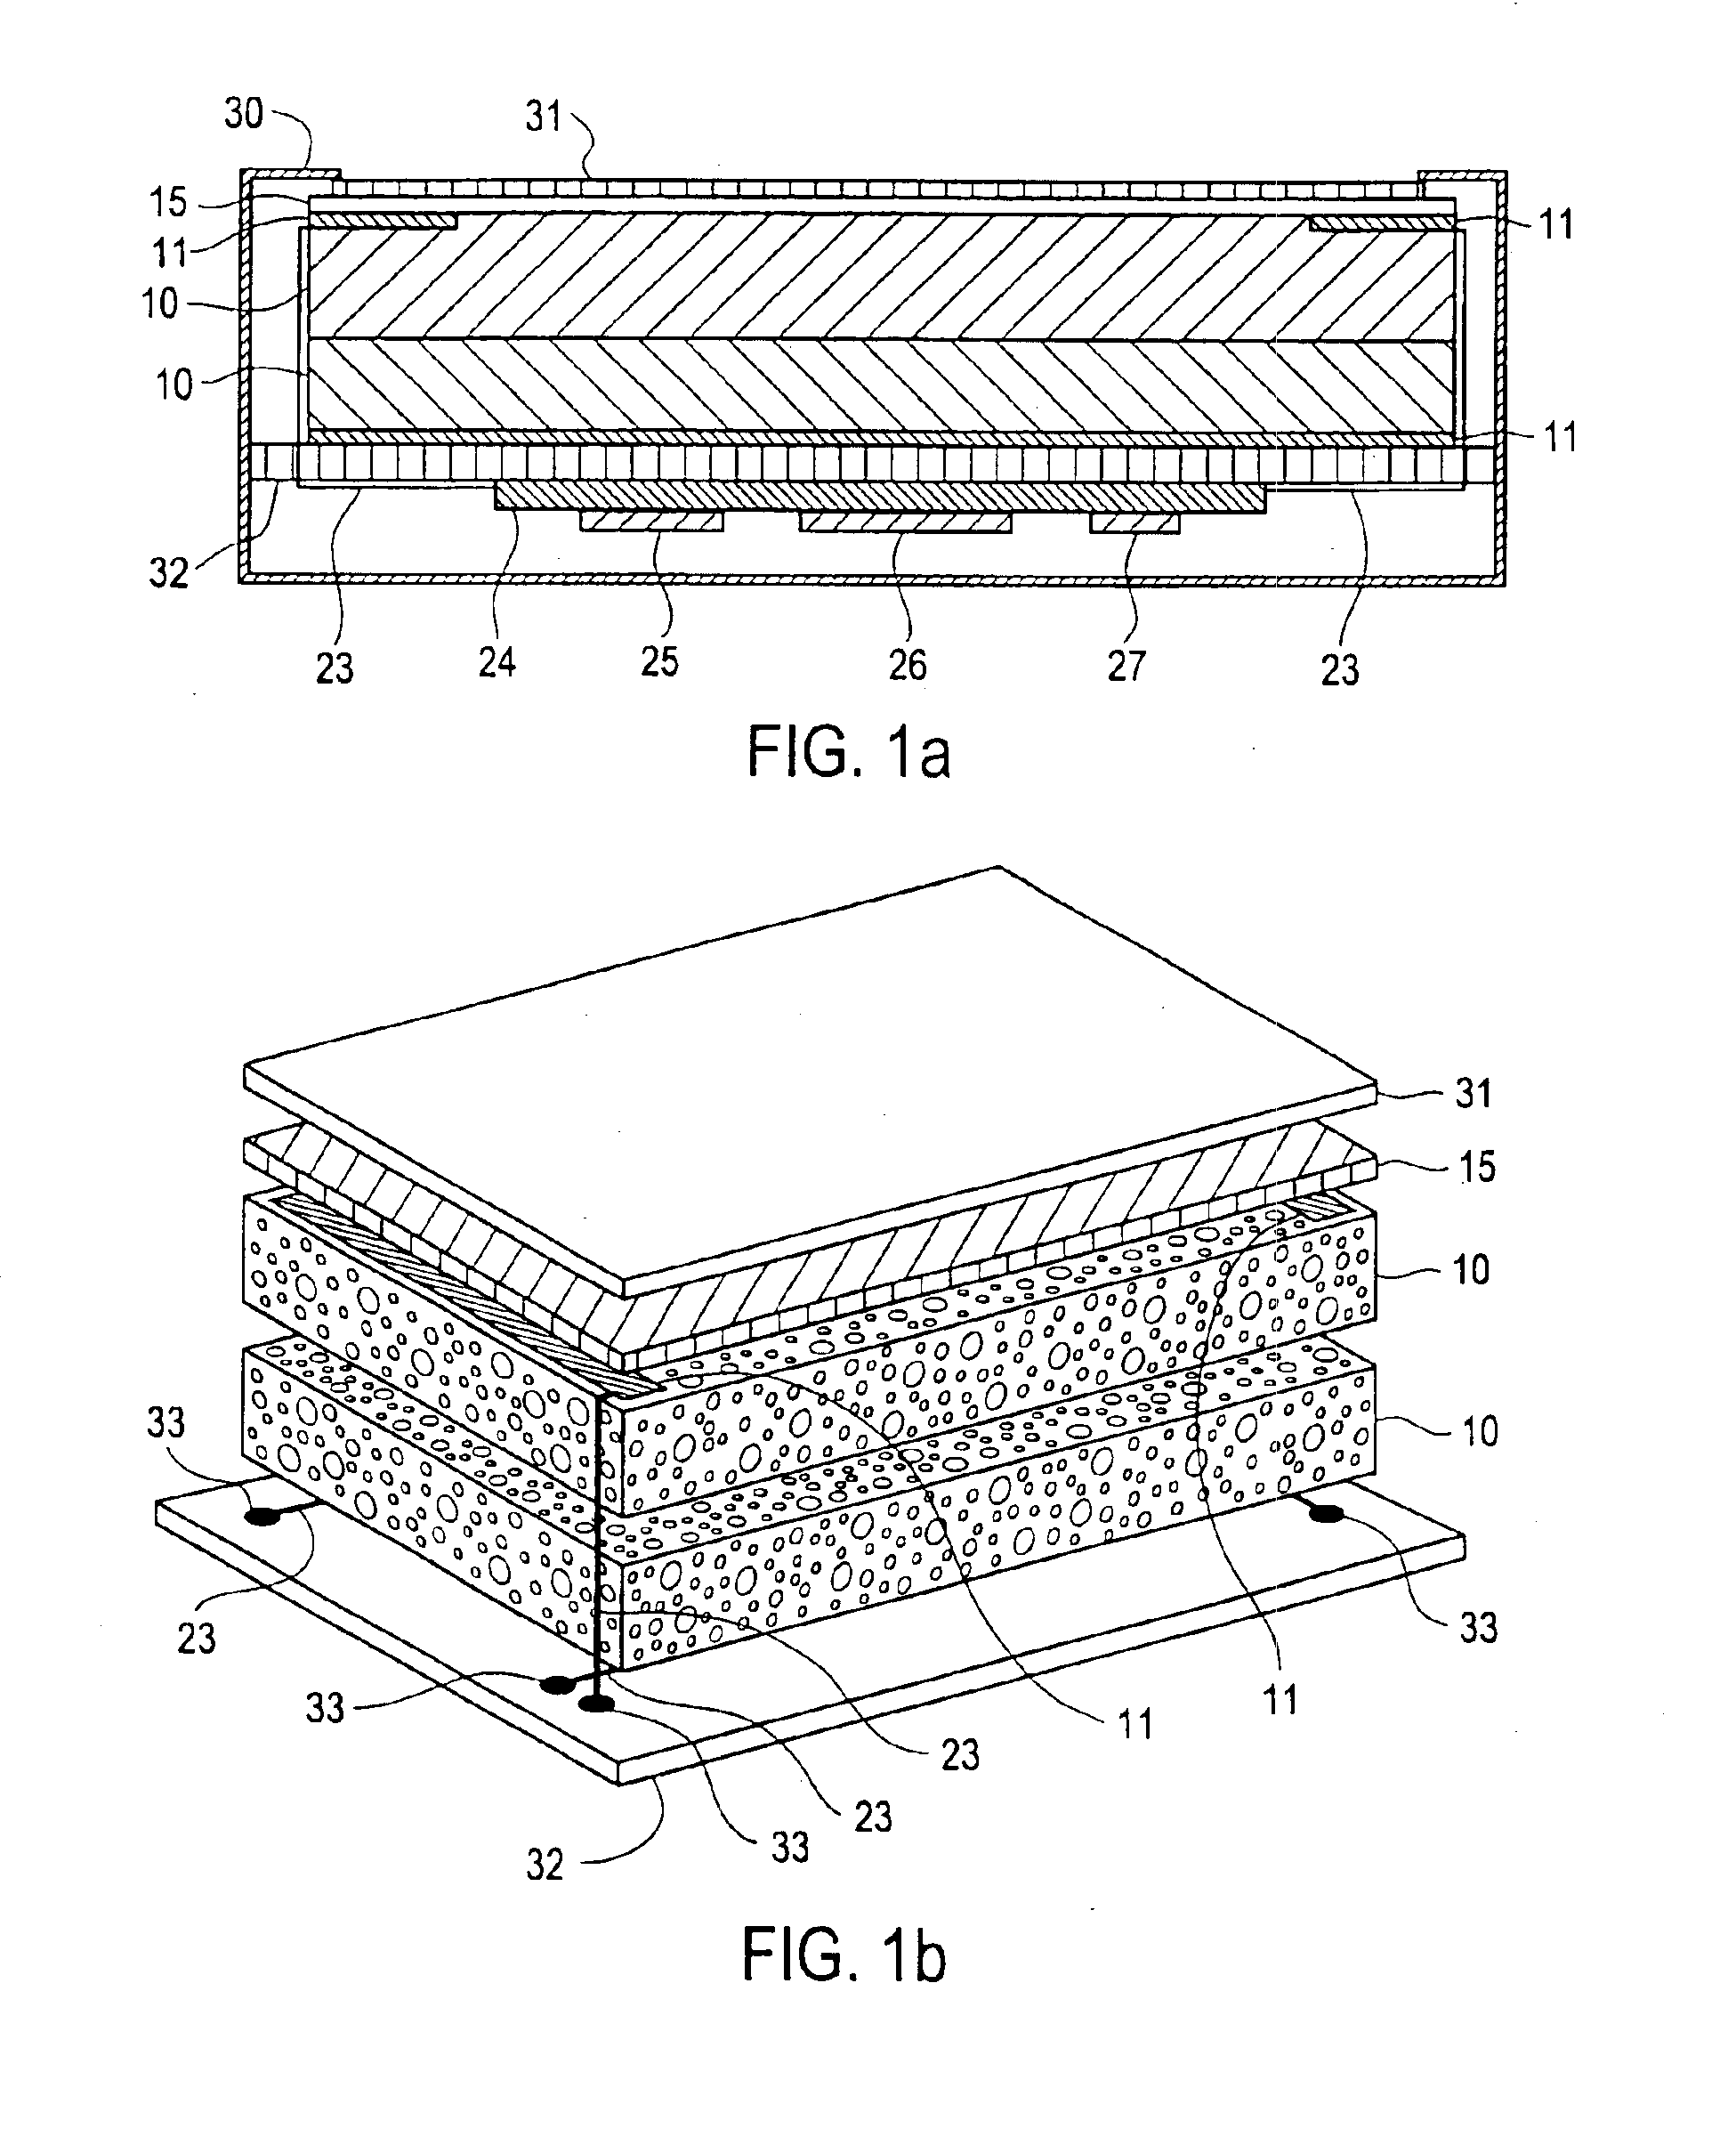 Configurable industrial input devices that use electrically conductive elastomer